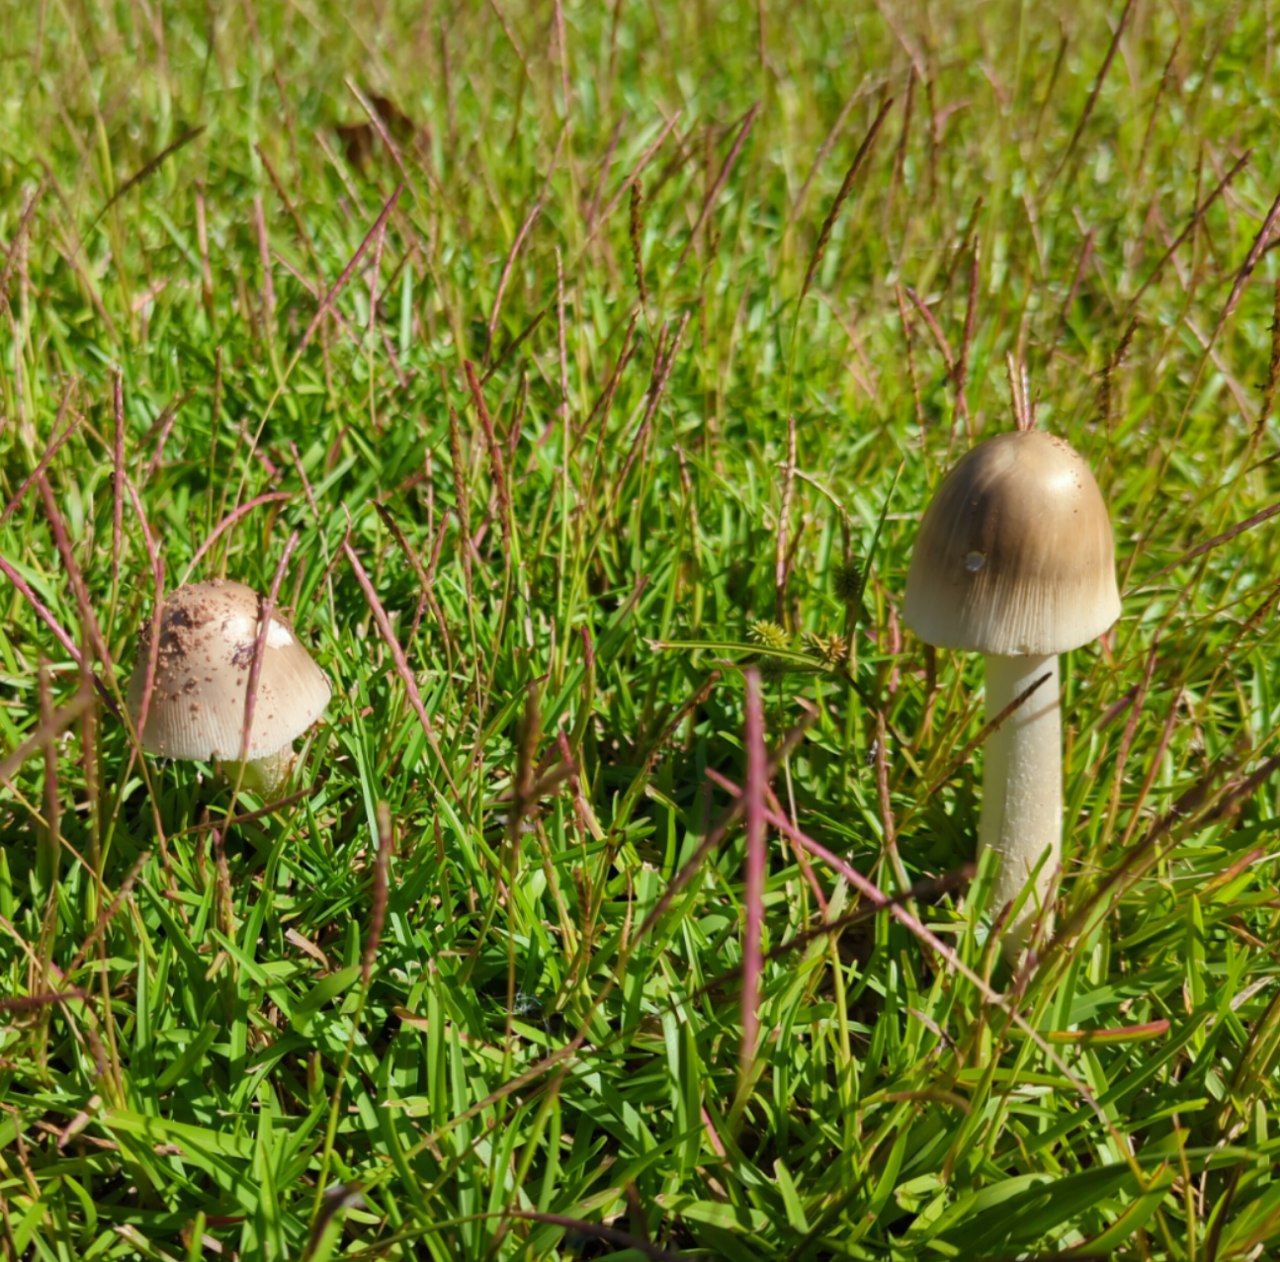 An unknown — for now — conical brown cap mushroom with white stem.